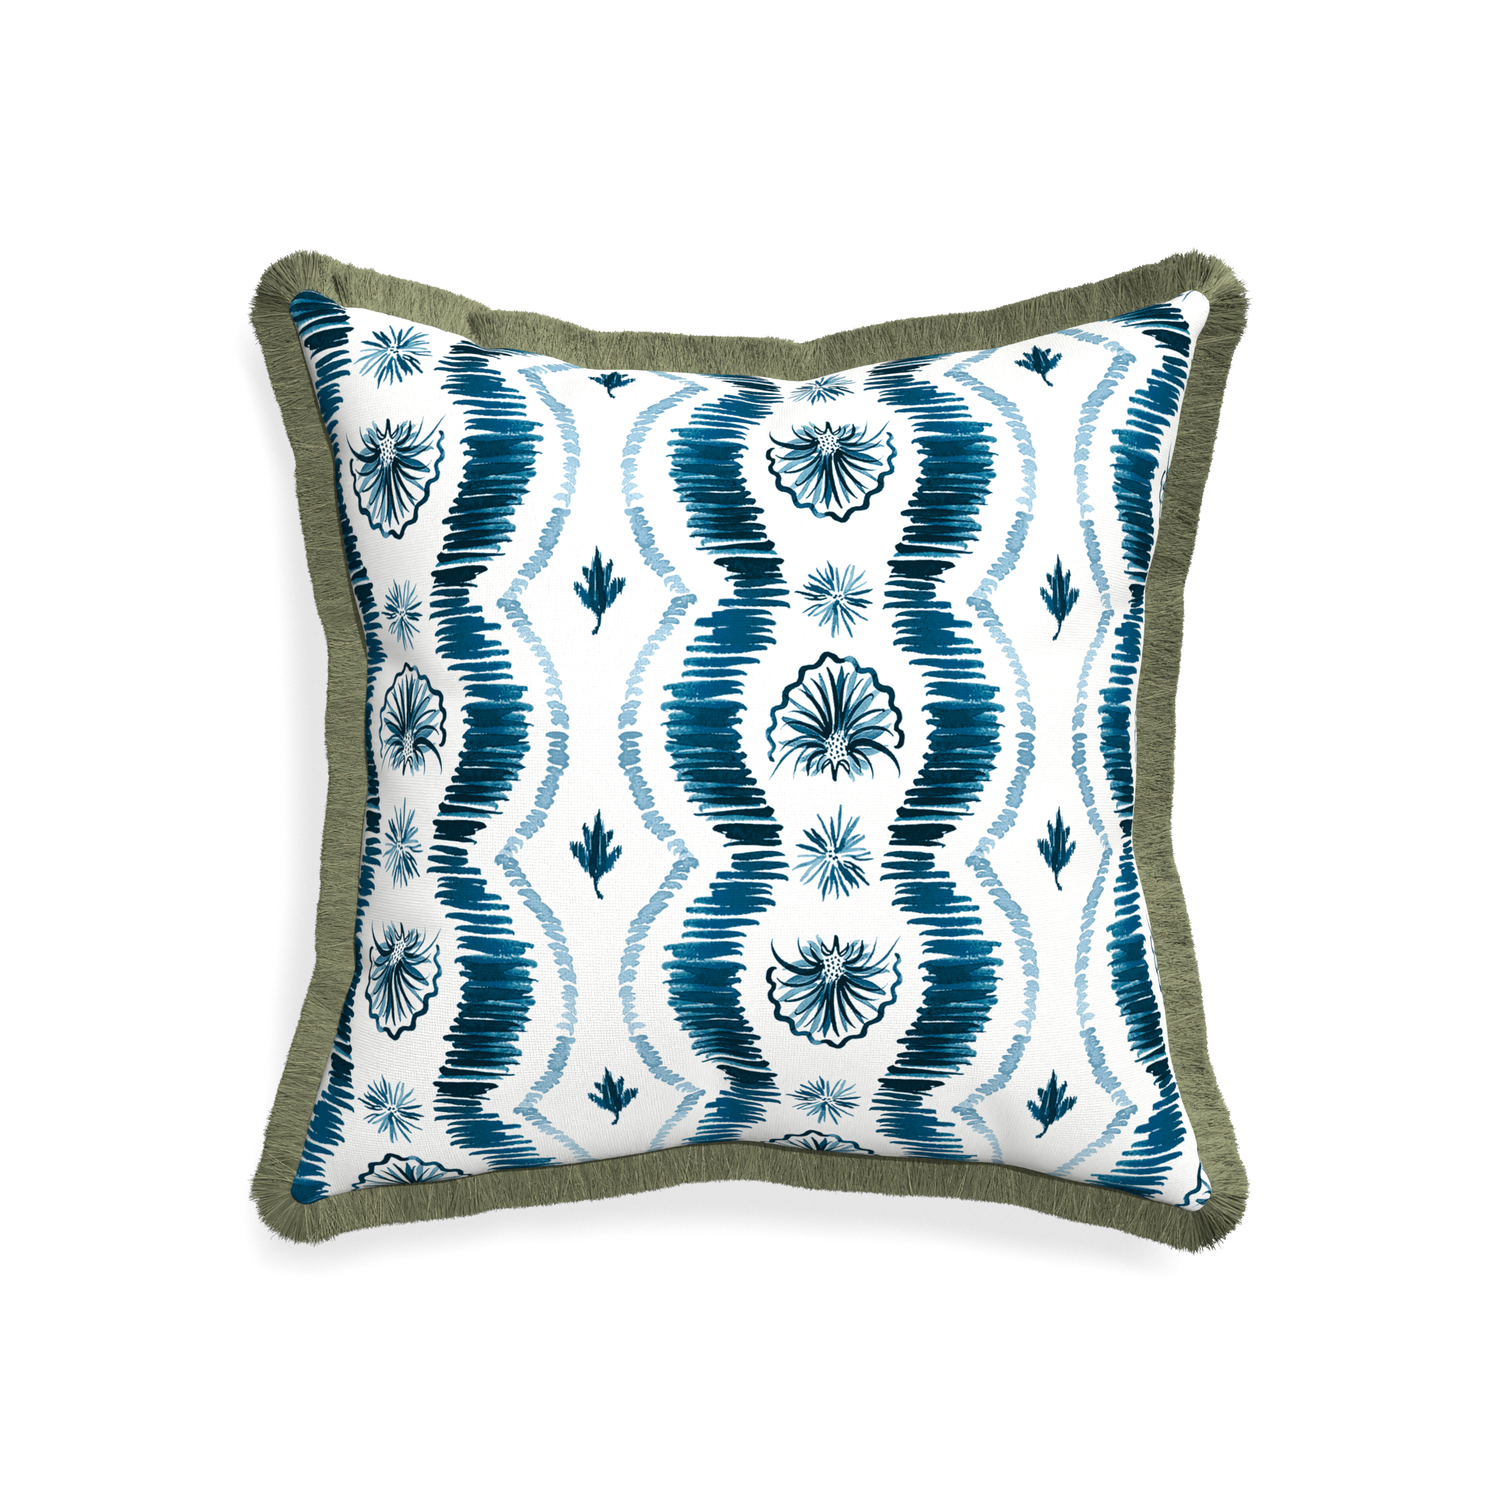 Square Blue Ikat Stripe Pillow with green fringe